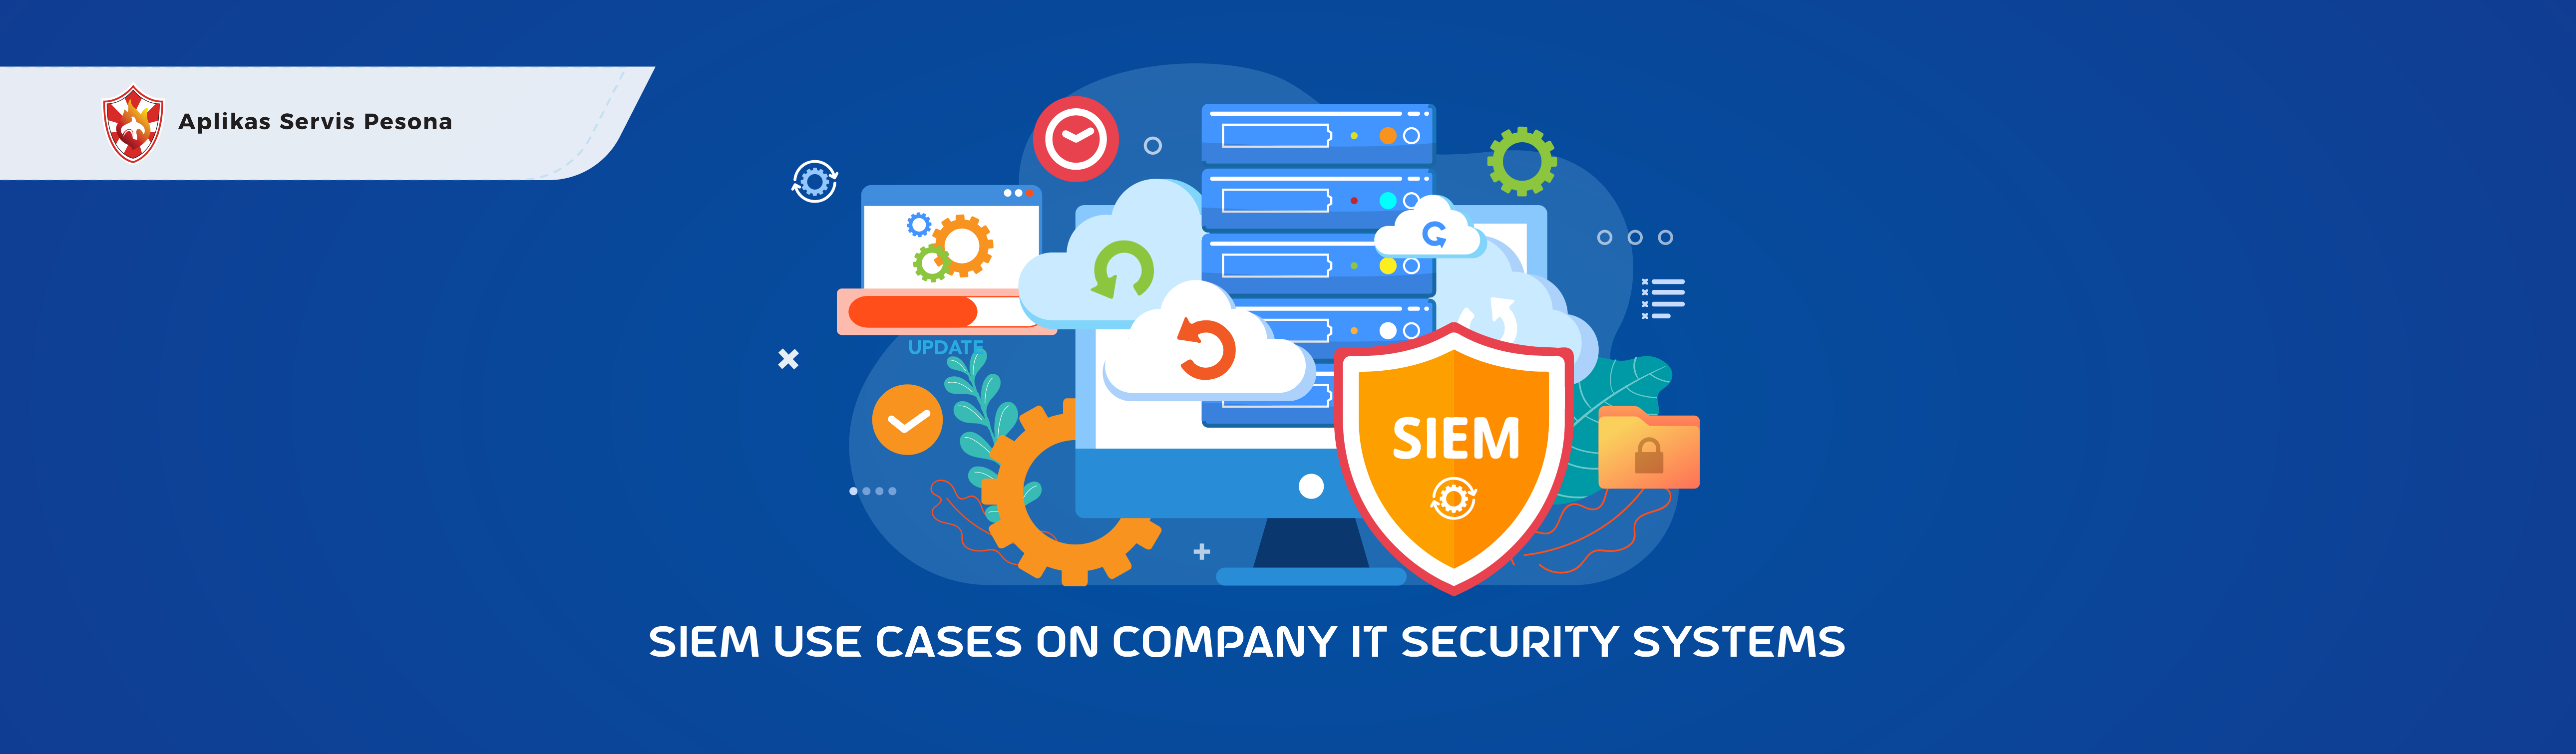 Examples SIEM Use Cases on Company IT Security Systems